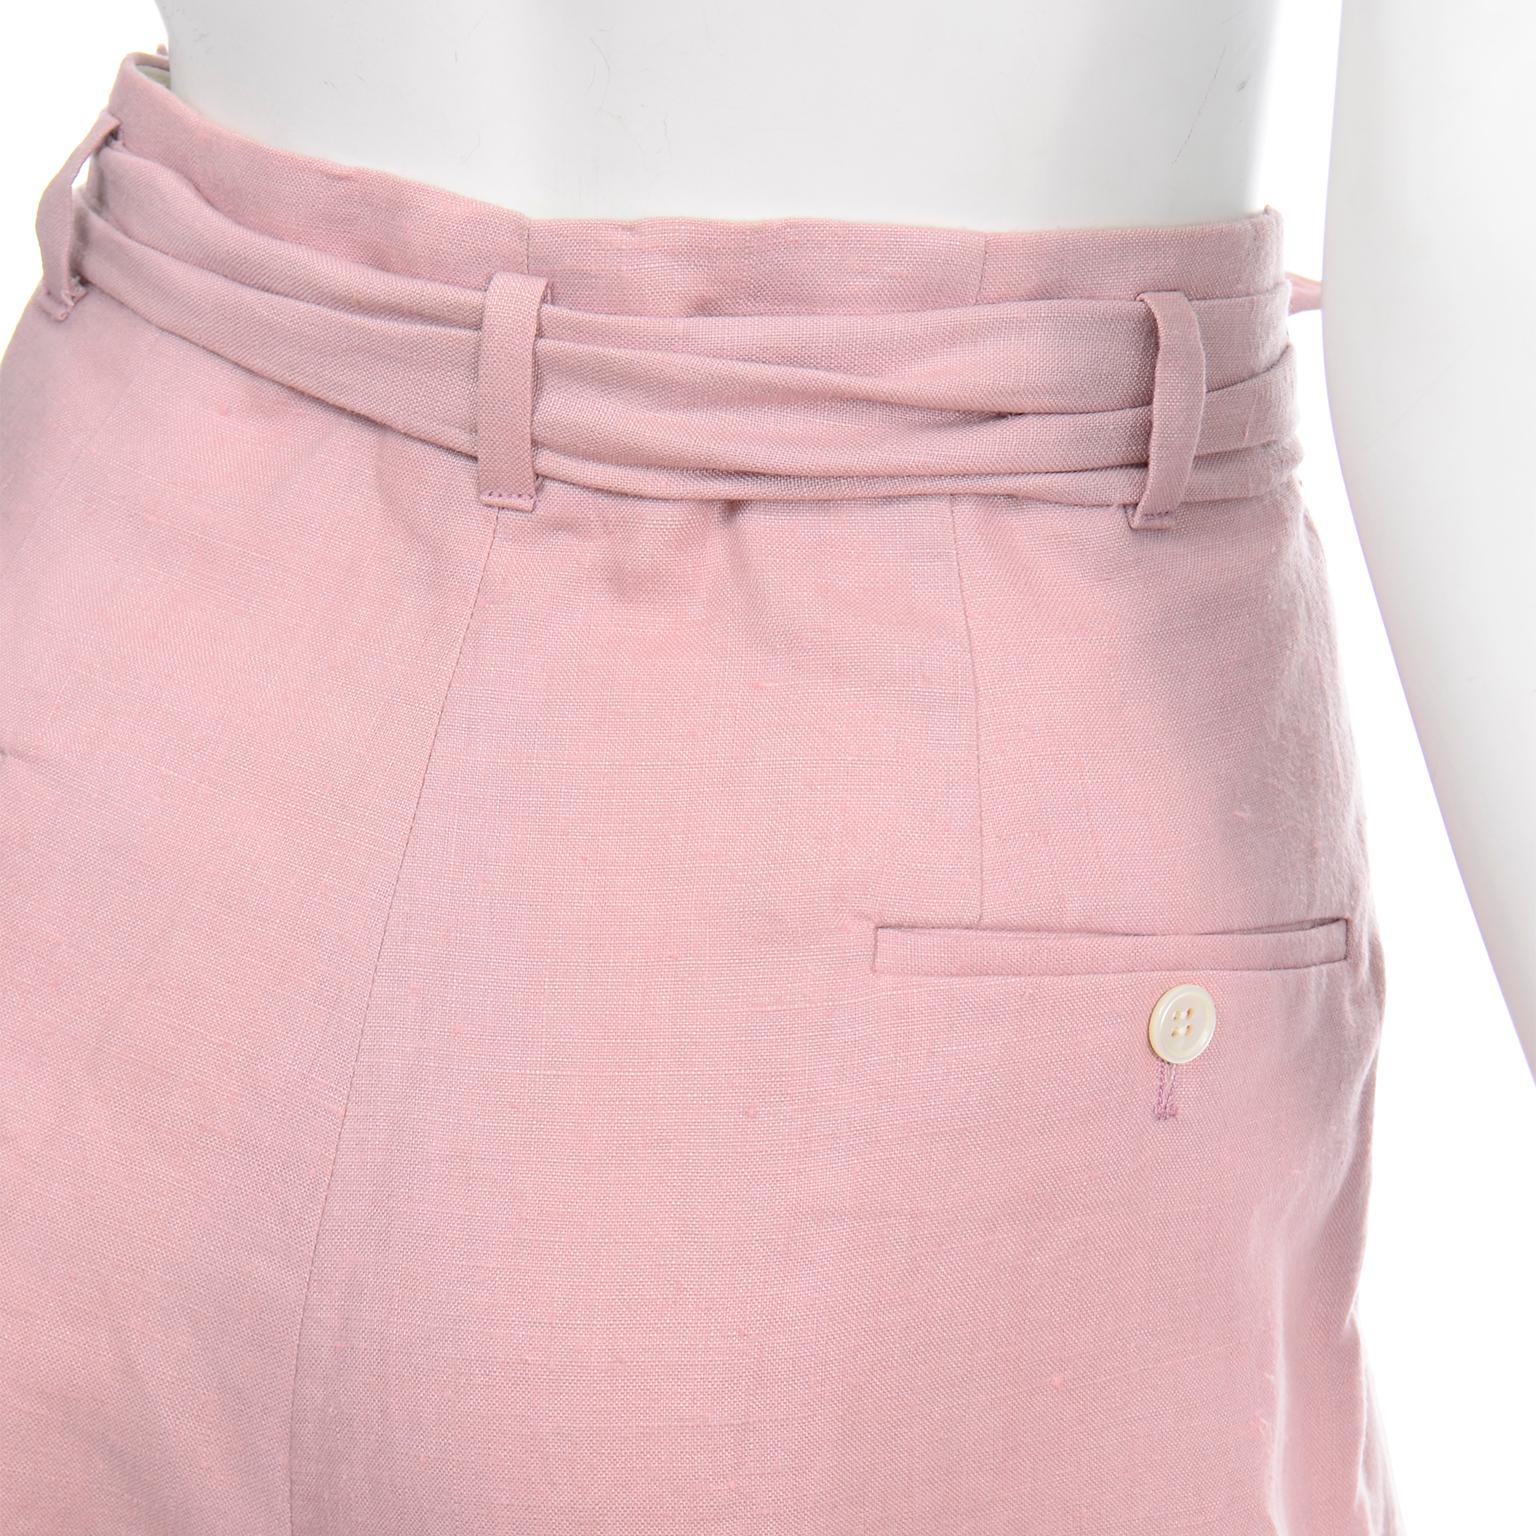 Ralph Lauren Pink Linen Vintage High Waisted Trousers With Sash Belt For Sale 1